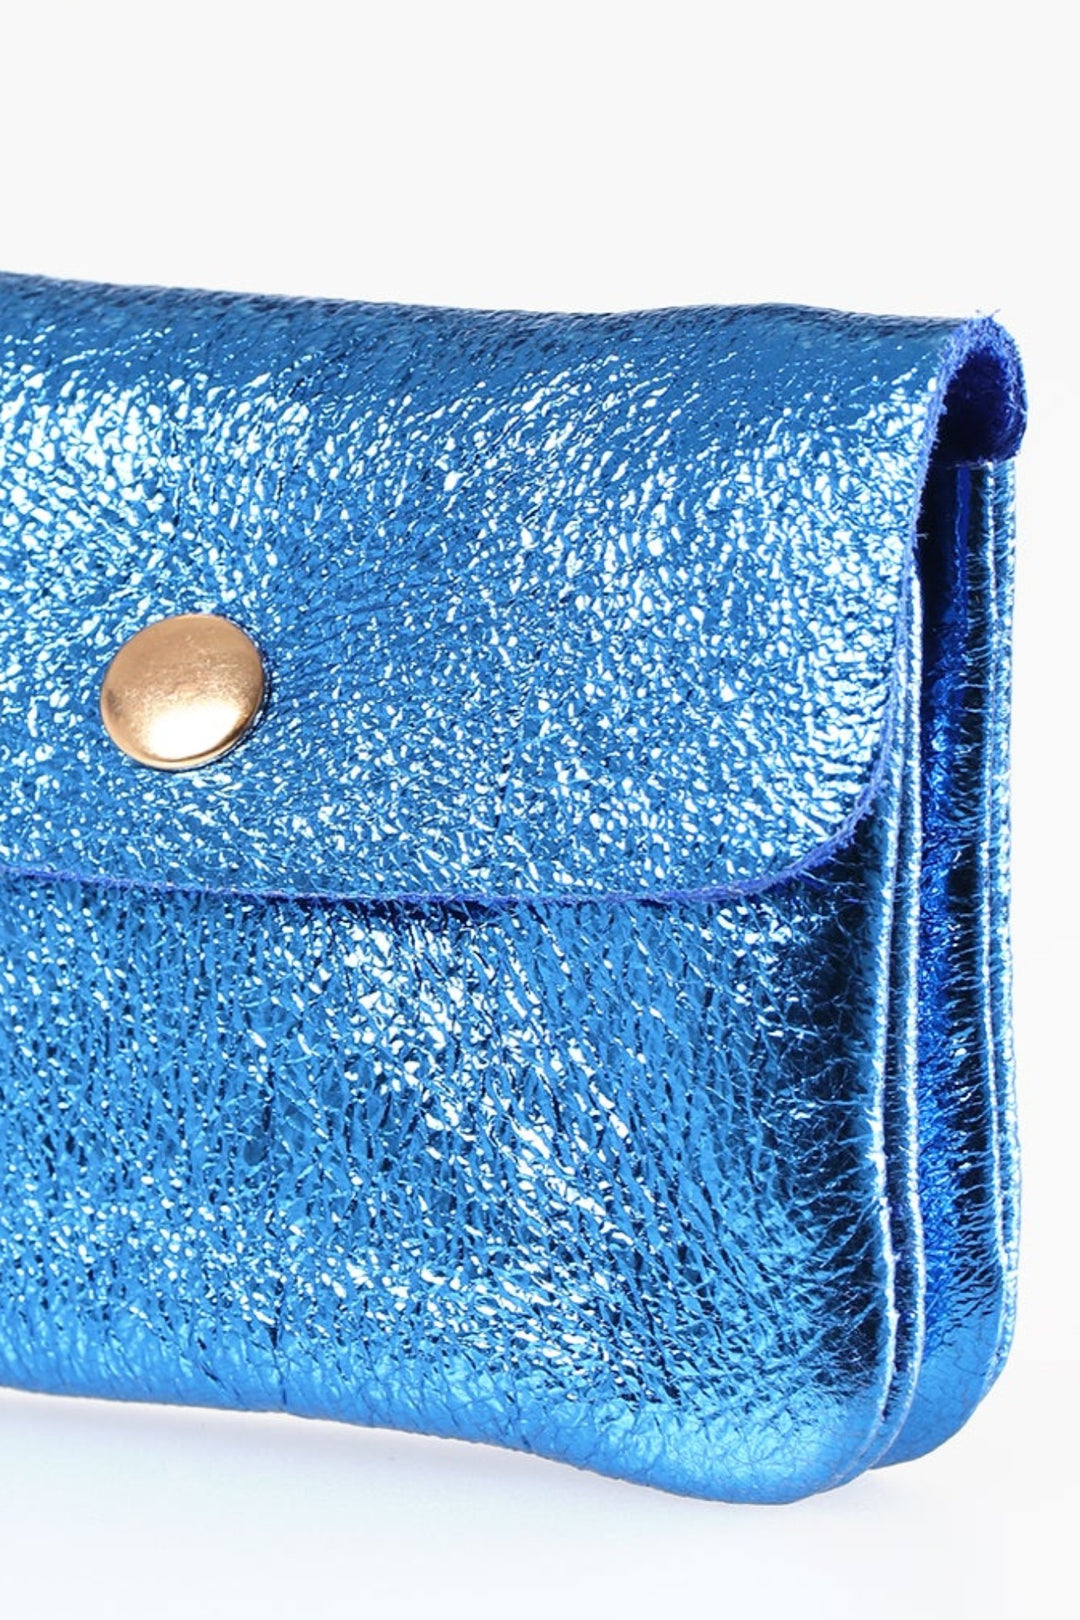 Metallic Royal Blue Small Leather Coin Purse